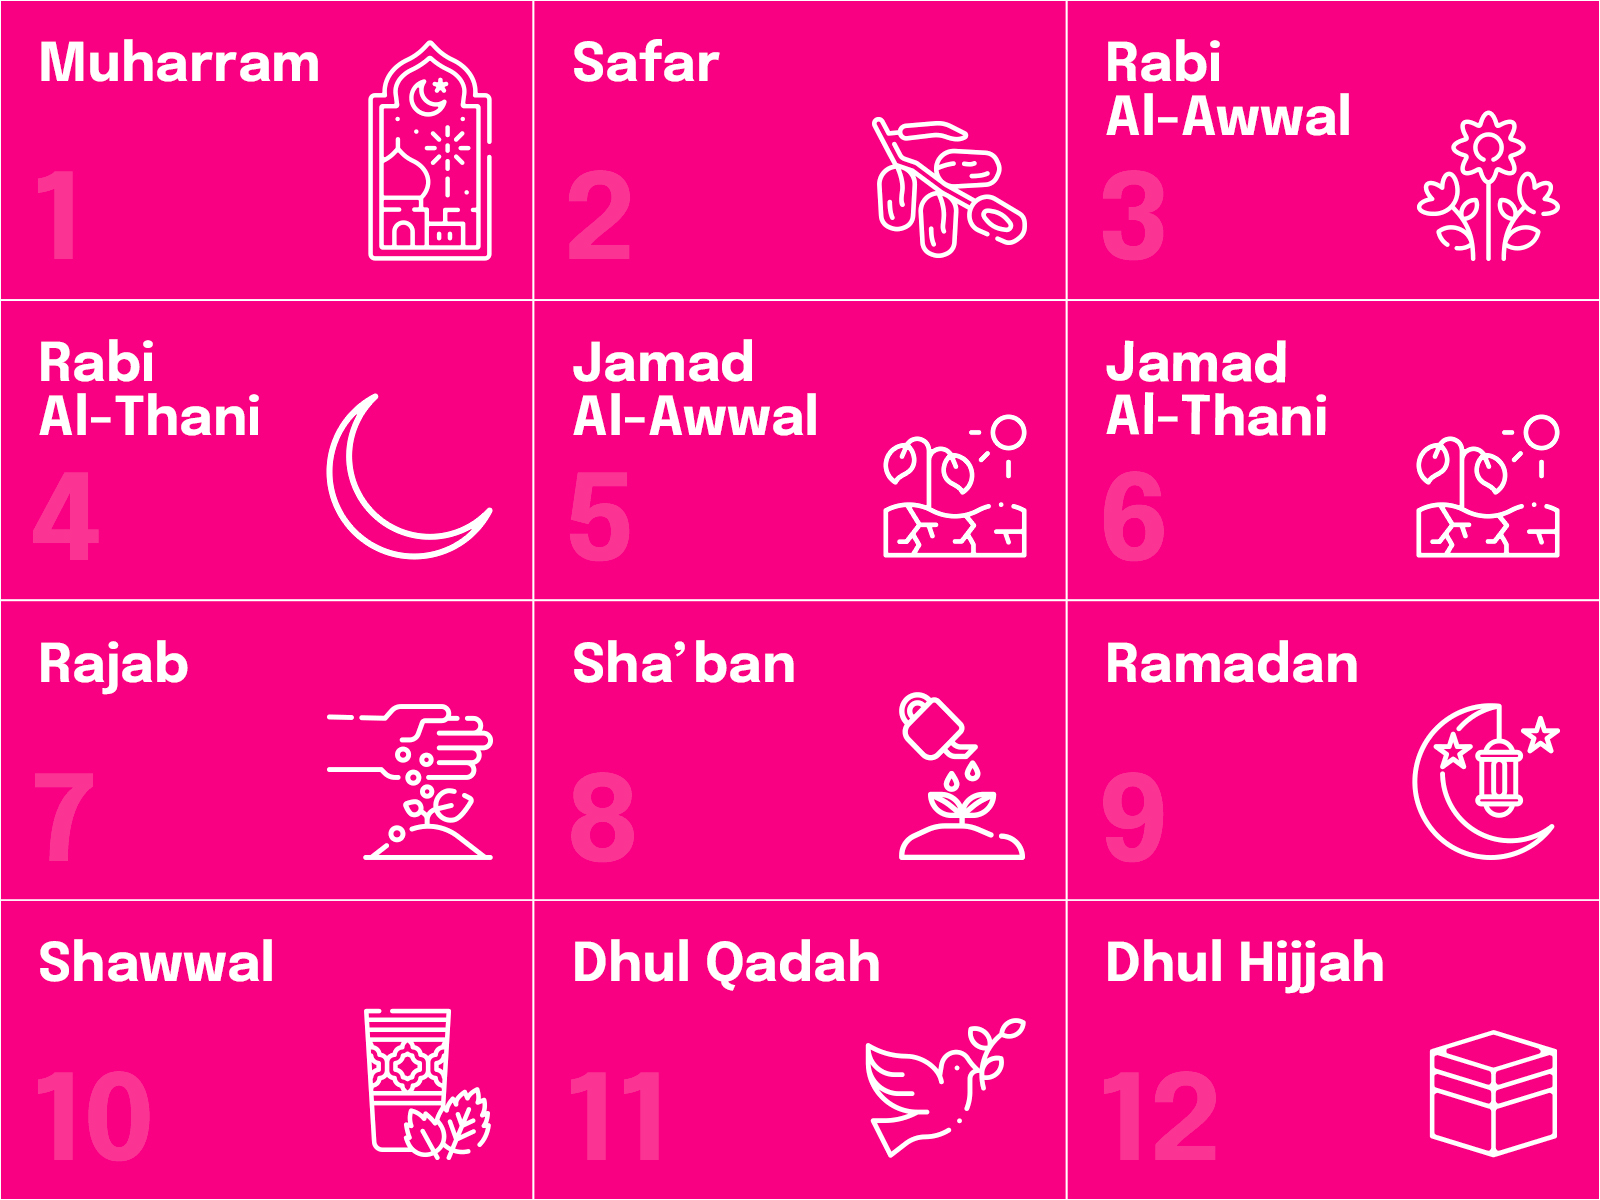 The Islamic Calendar: All You Need to Know About the Hijri Calendar